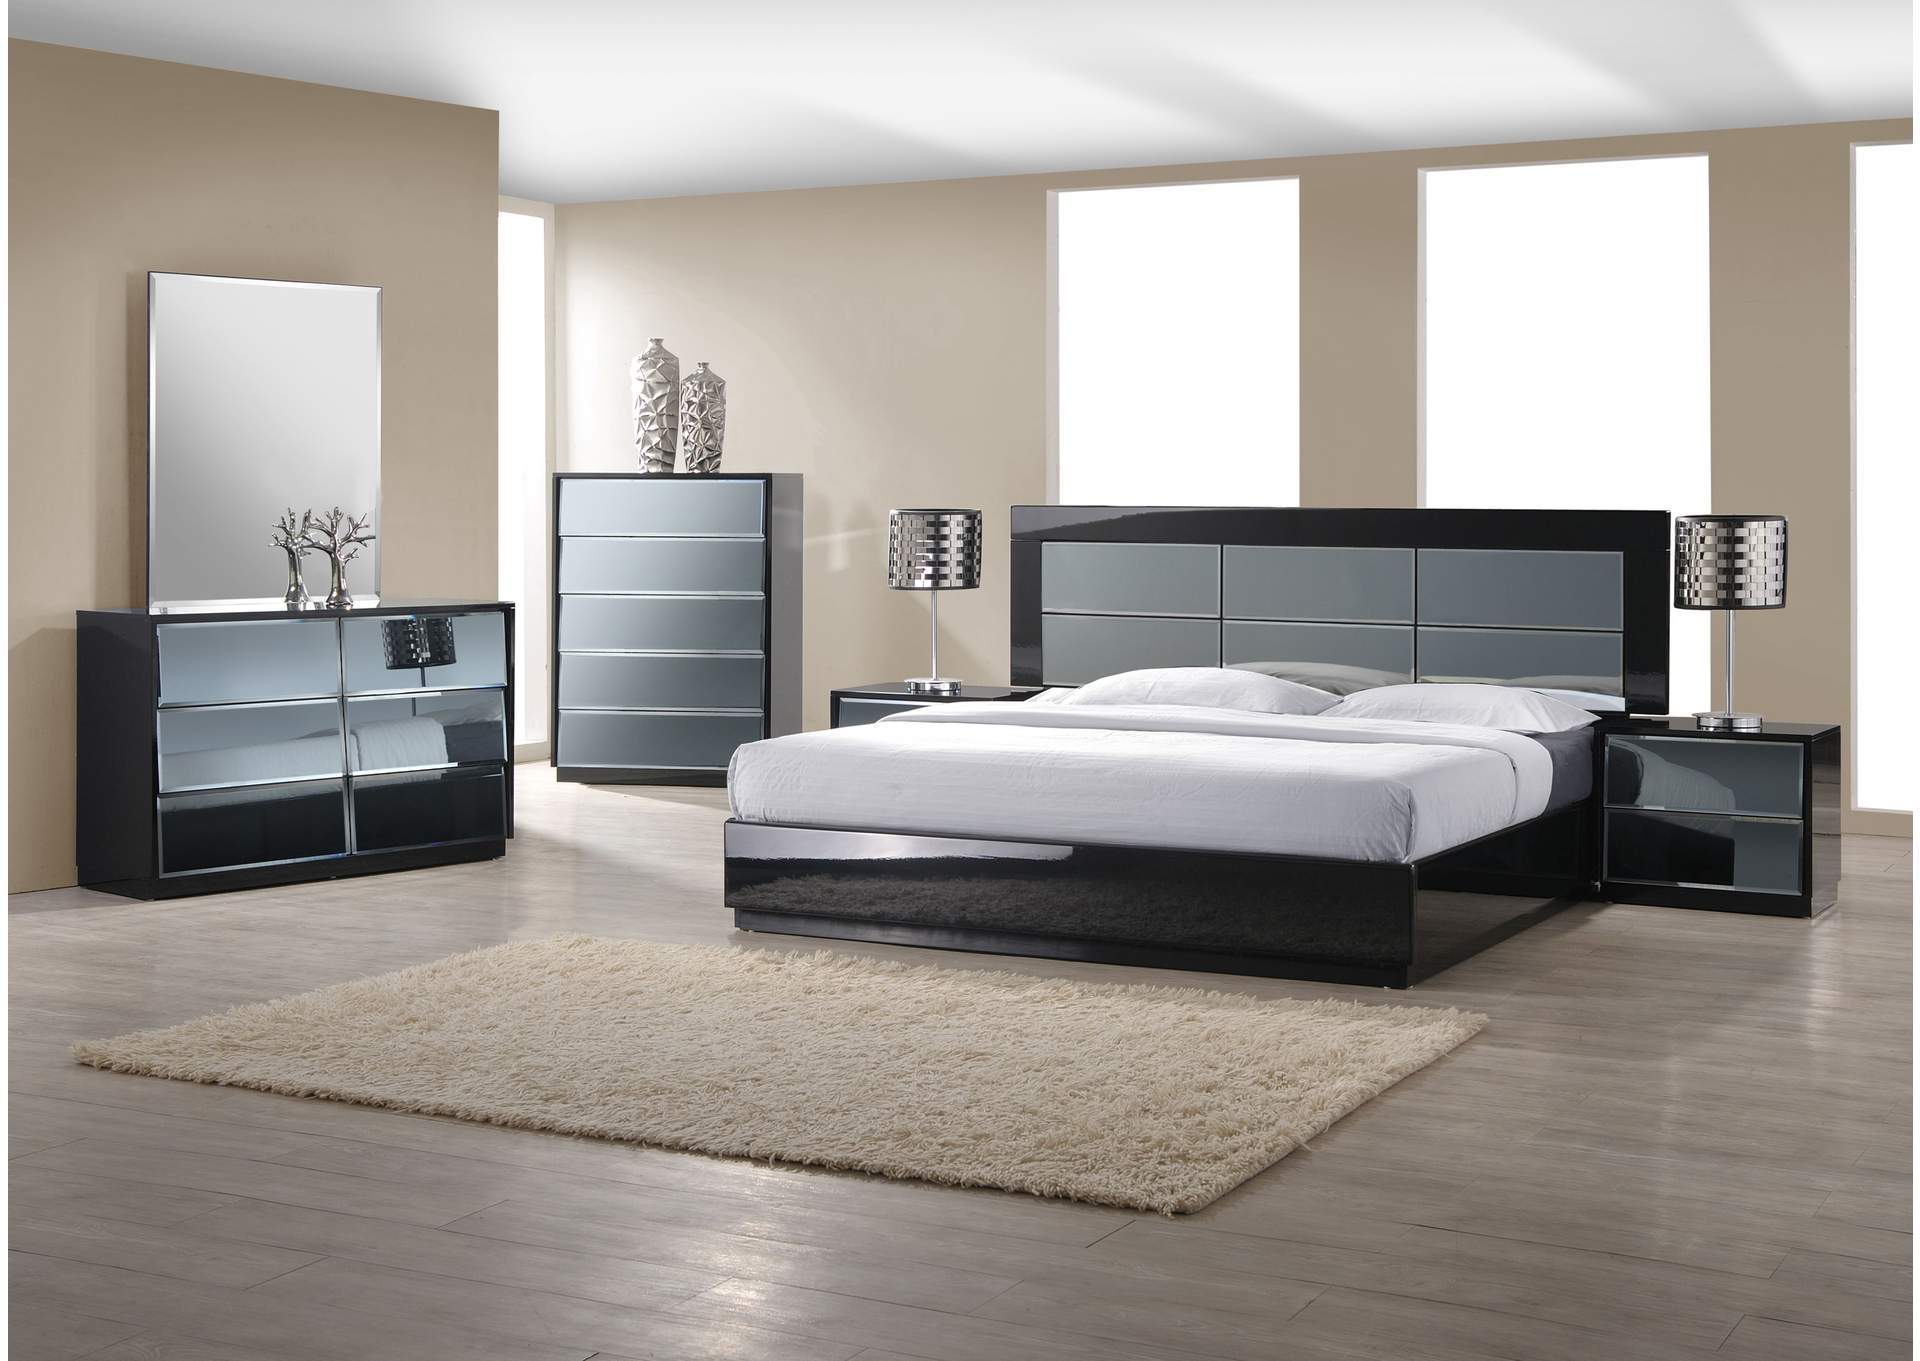 Contemporary King Size 4 Piece Set,Chintaly Imports